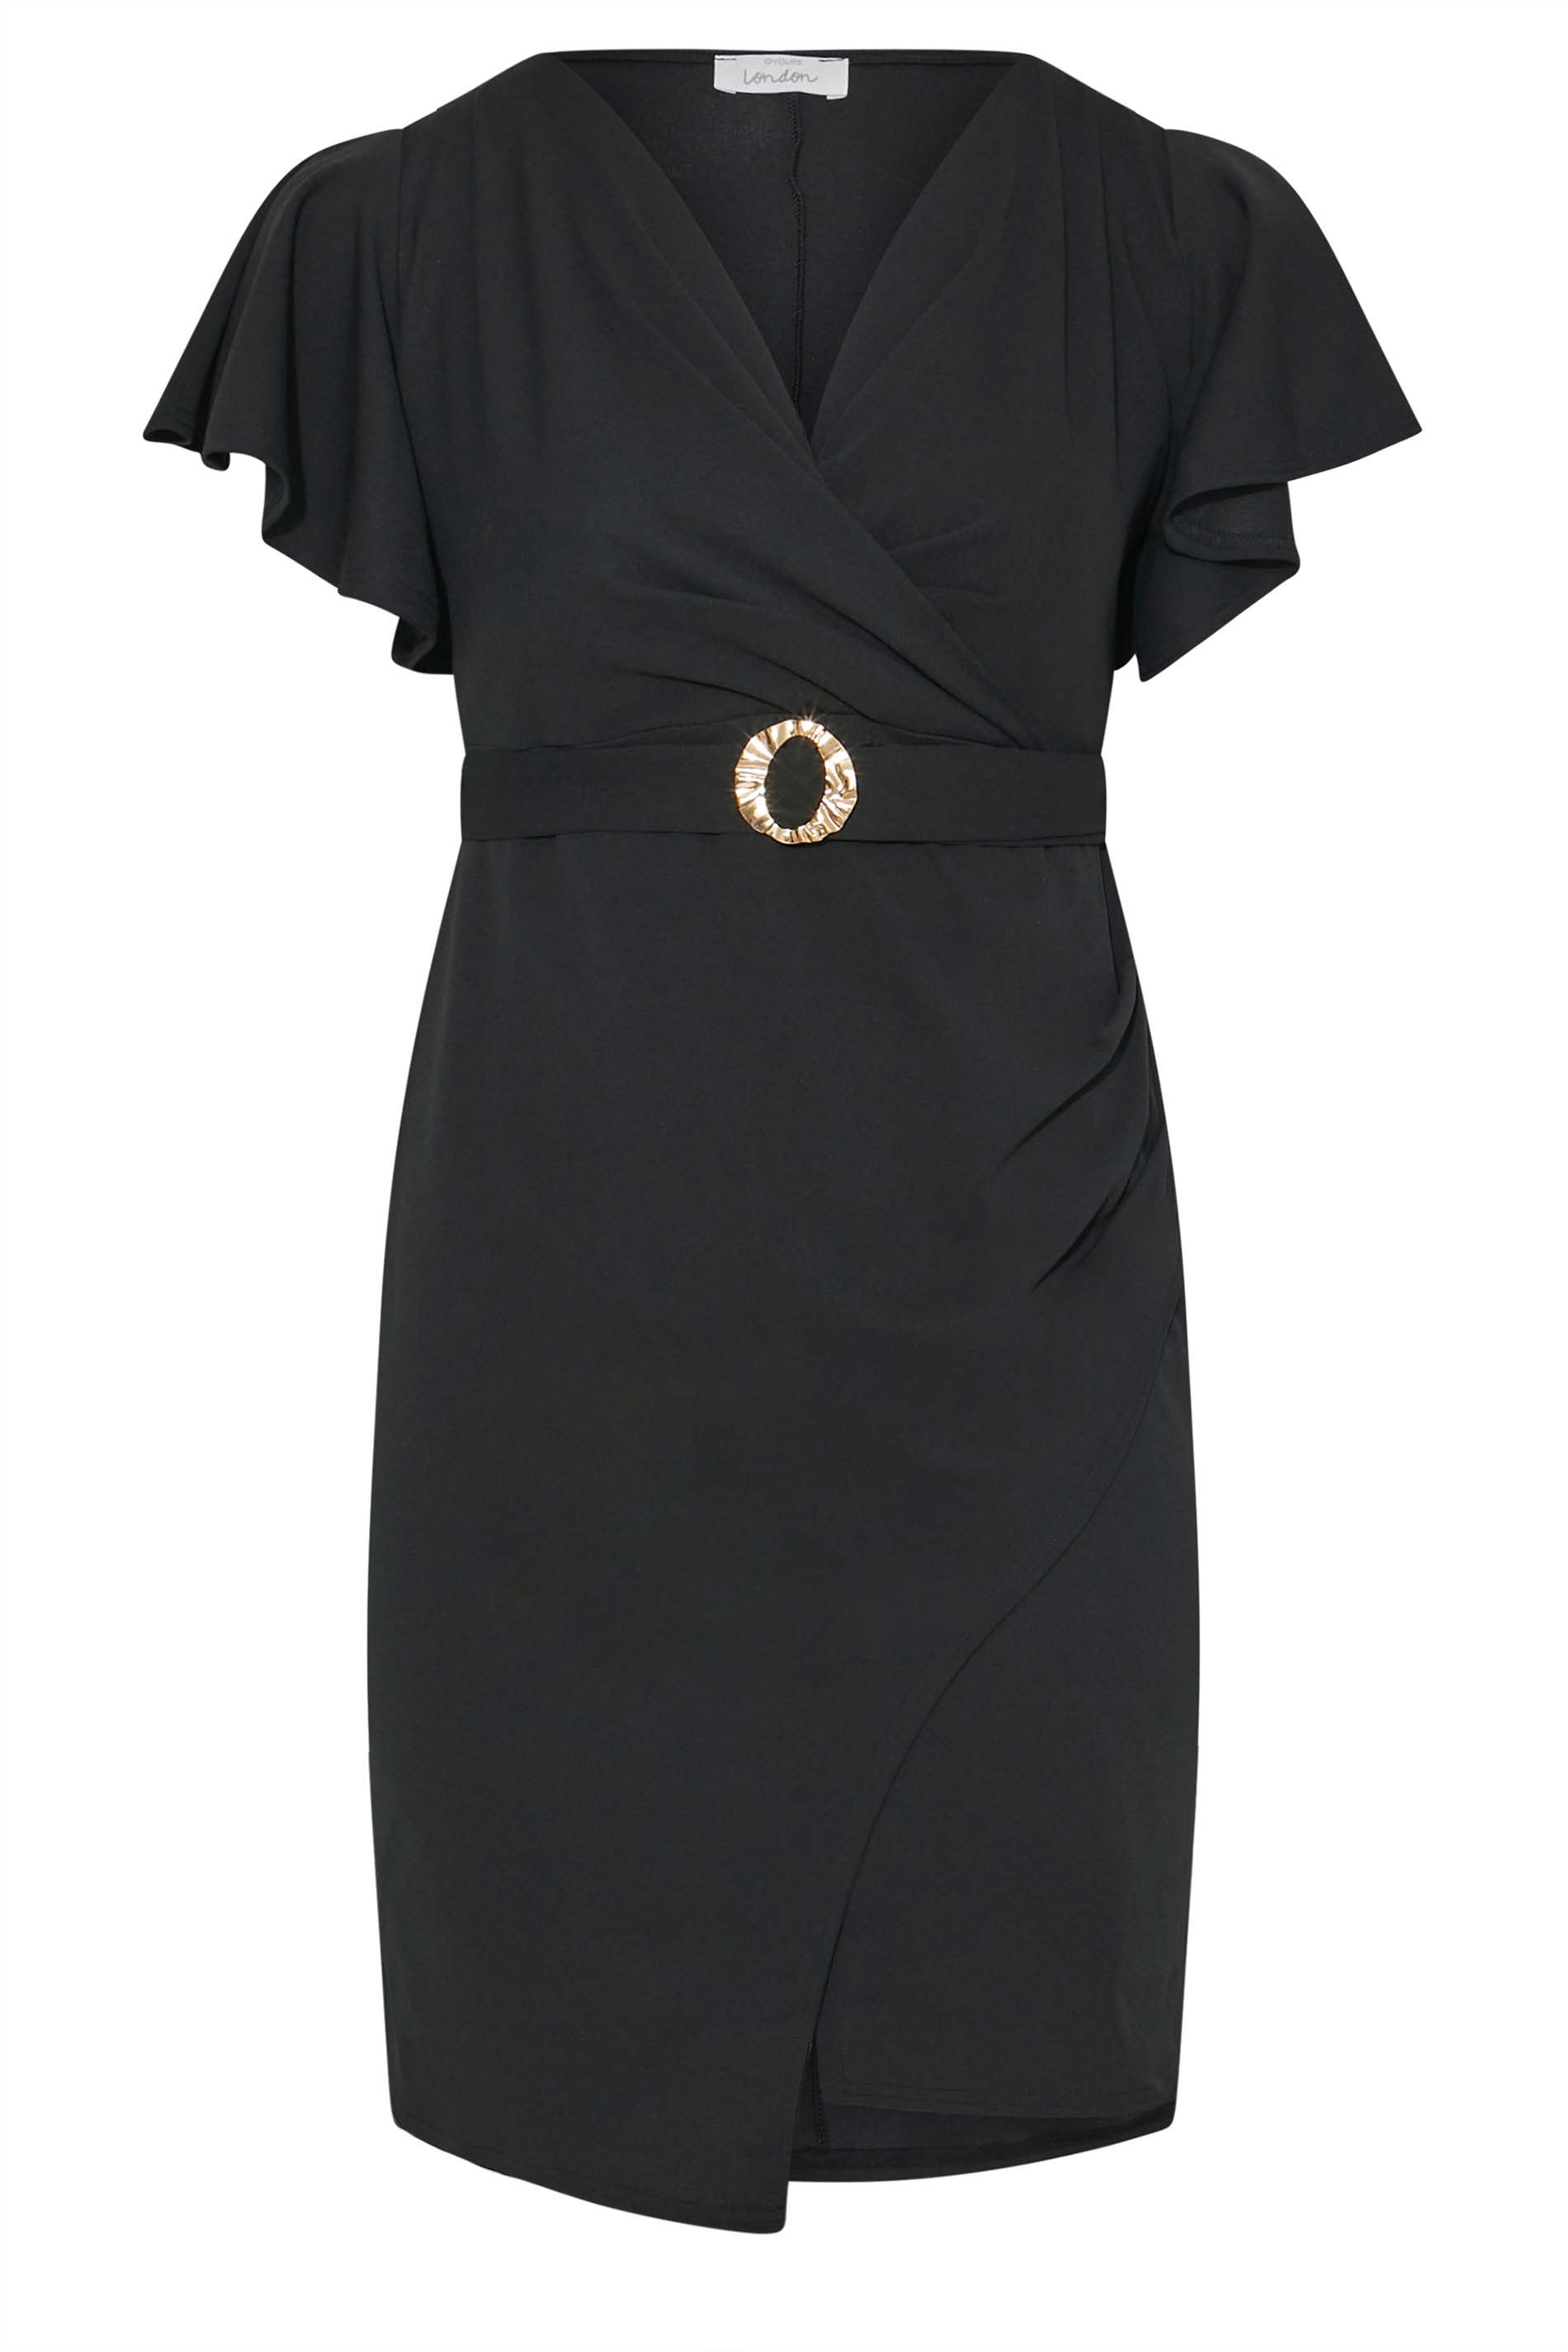 Robes Grande Taille Grande taille  Robes de Sorties | YOURS LONDON Curve Black Buckle Wrap Bodycon Dress - FY92508